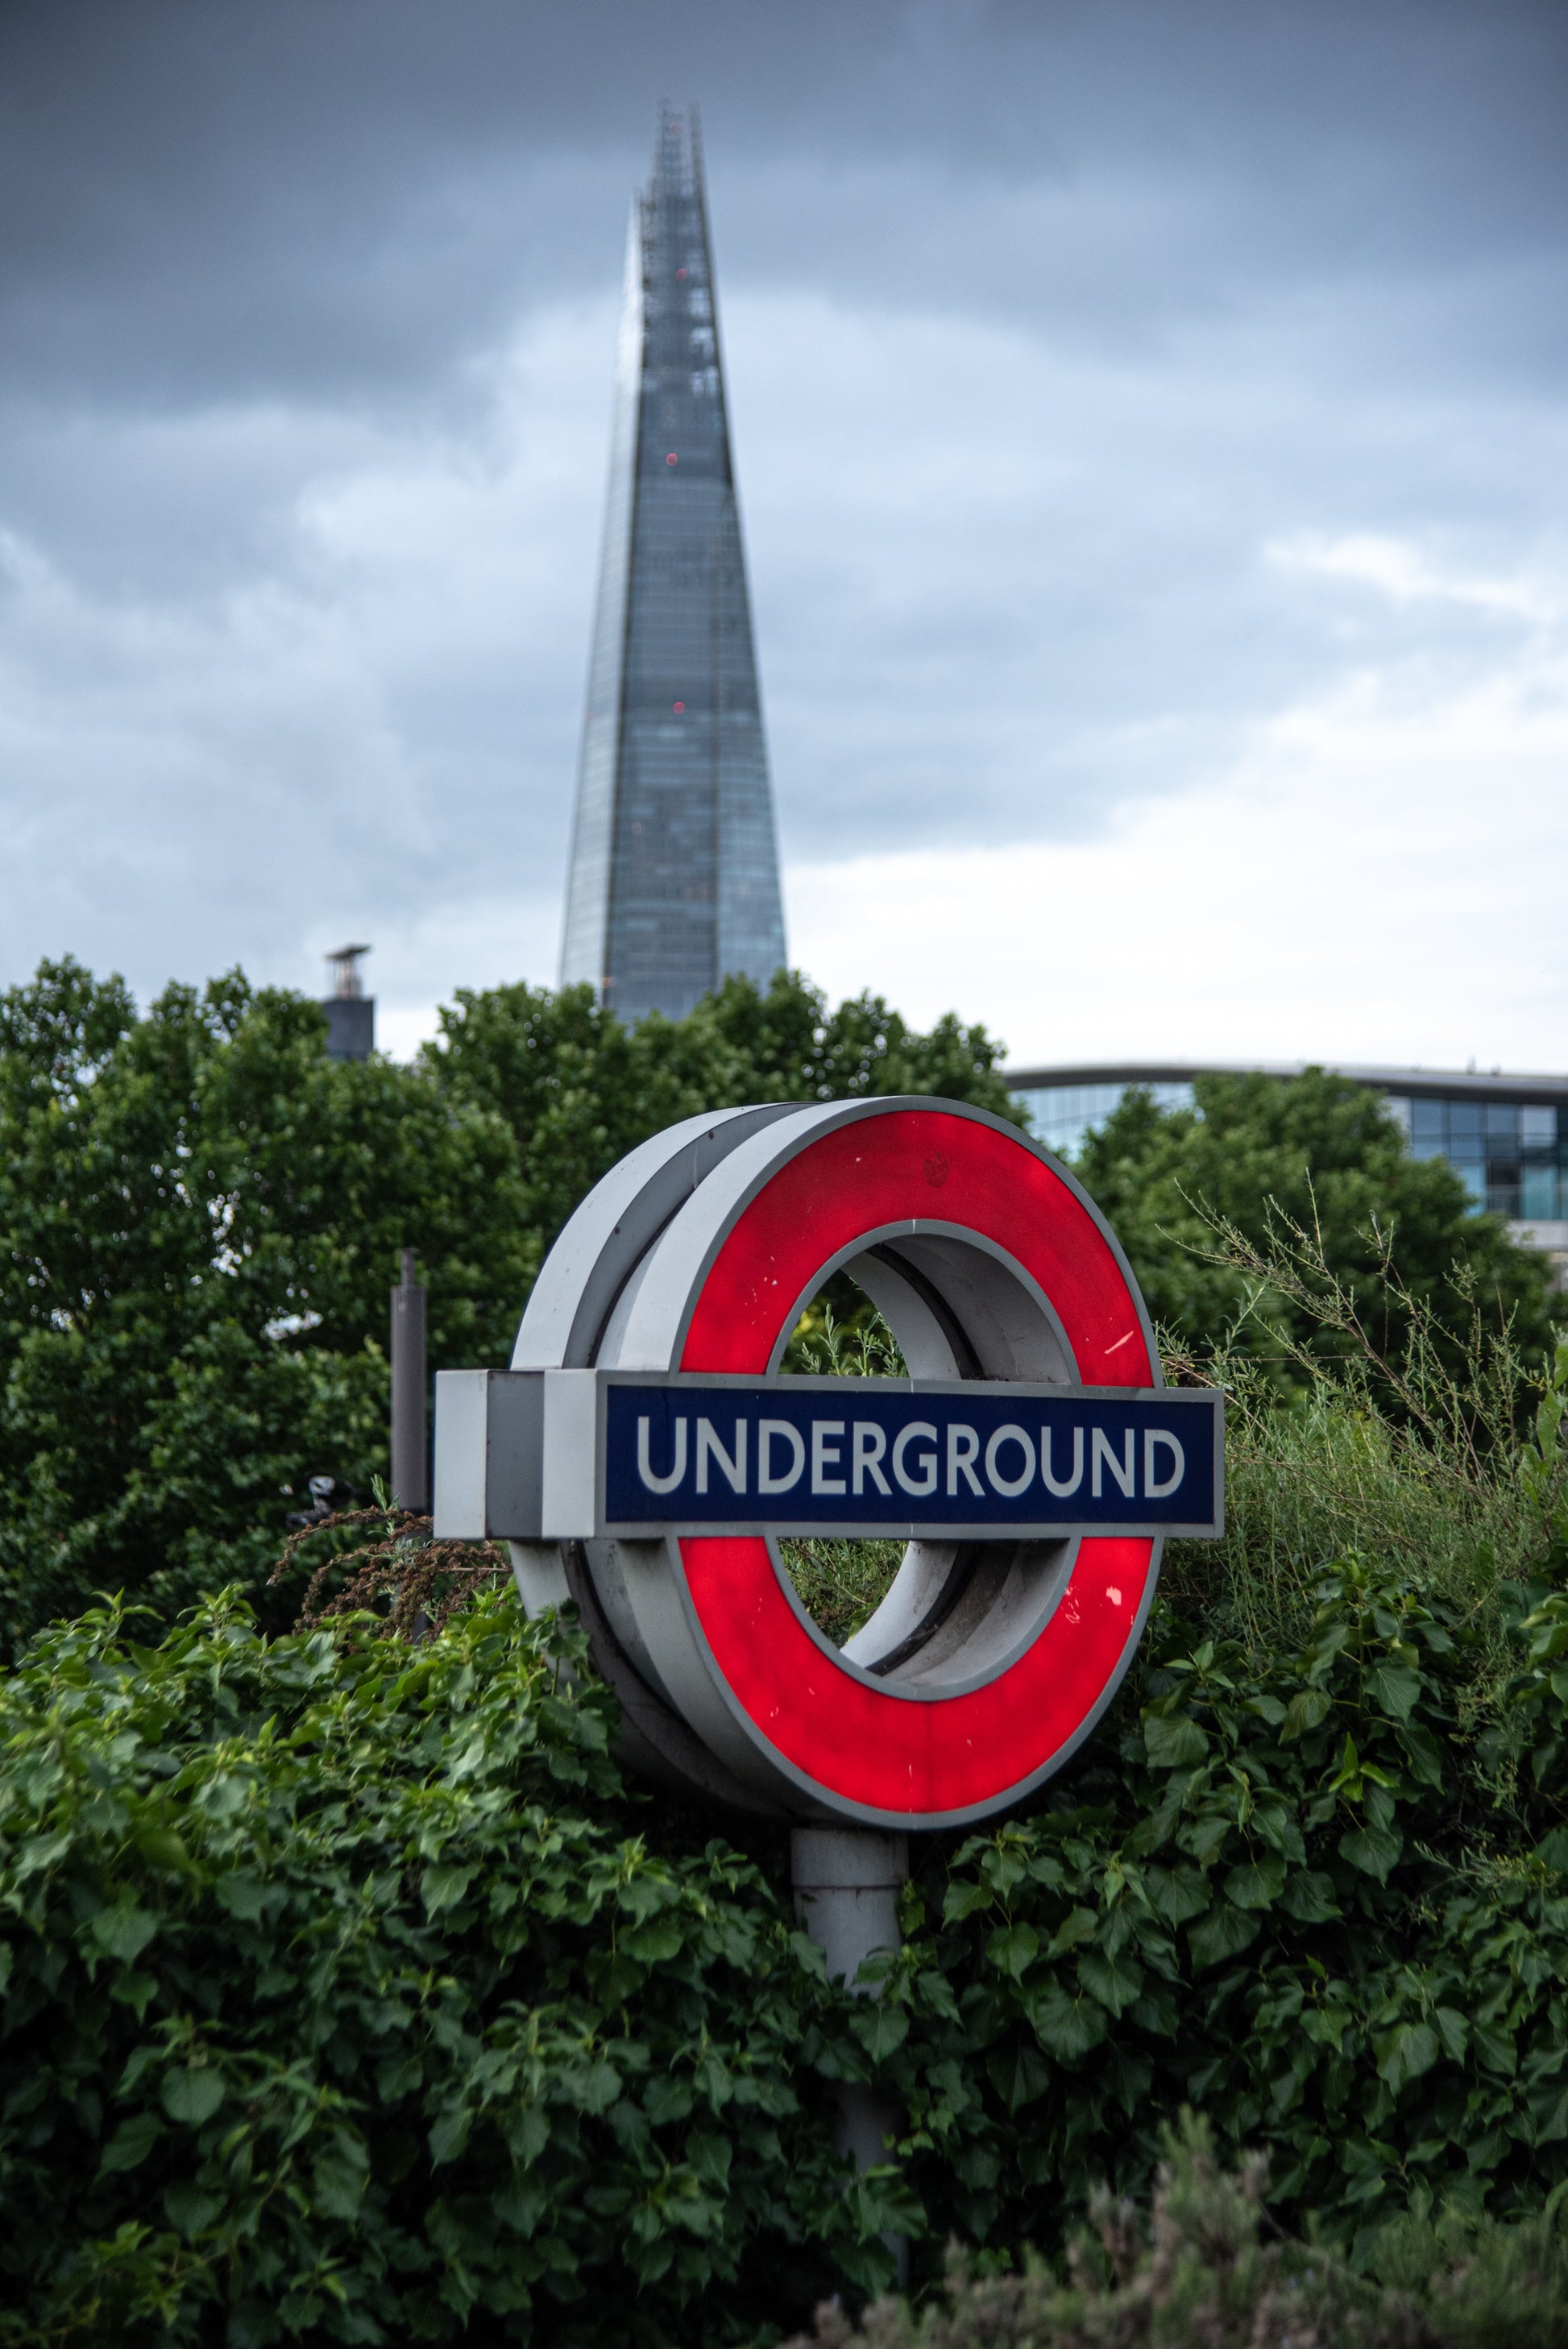 A London Underground sign surrounded by shrubs outside the station